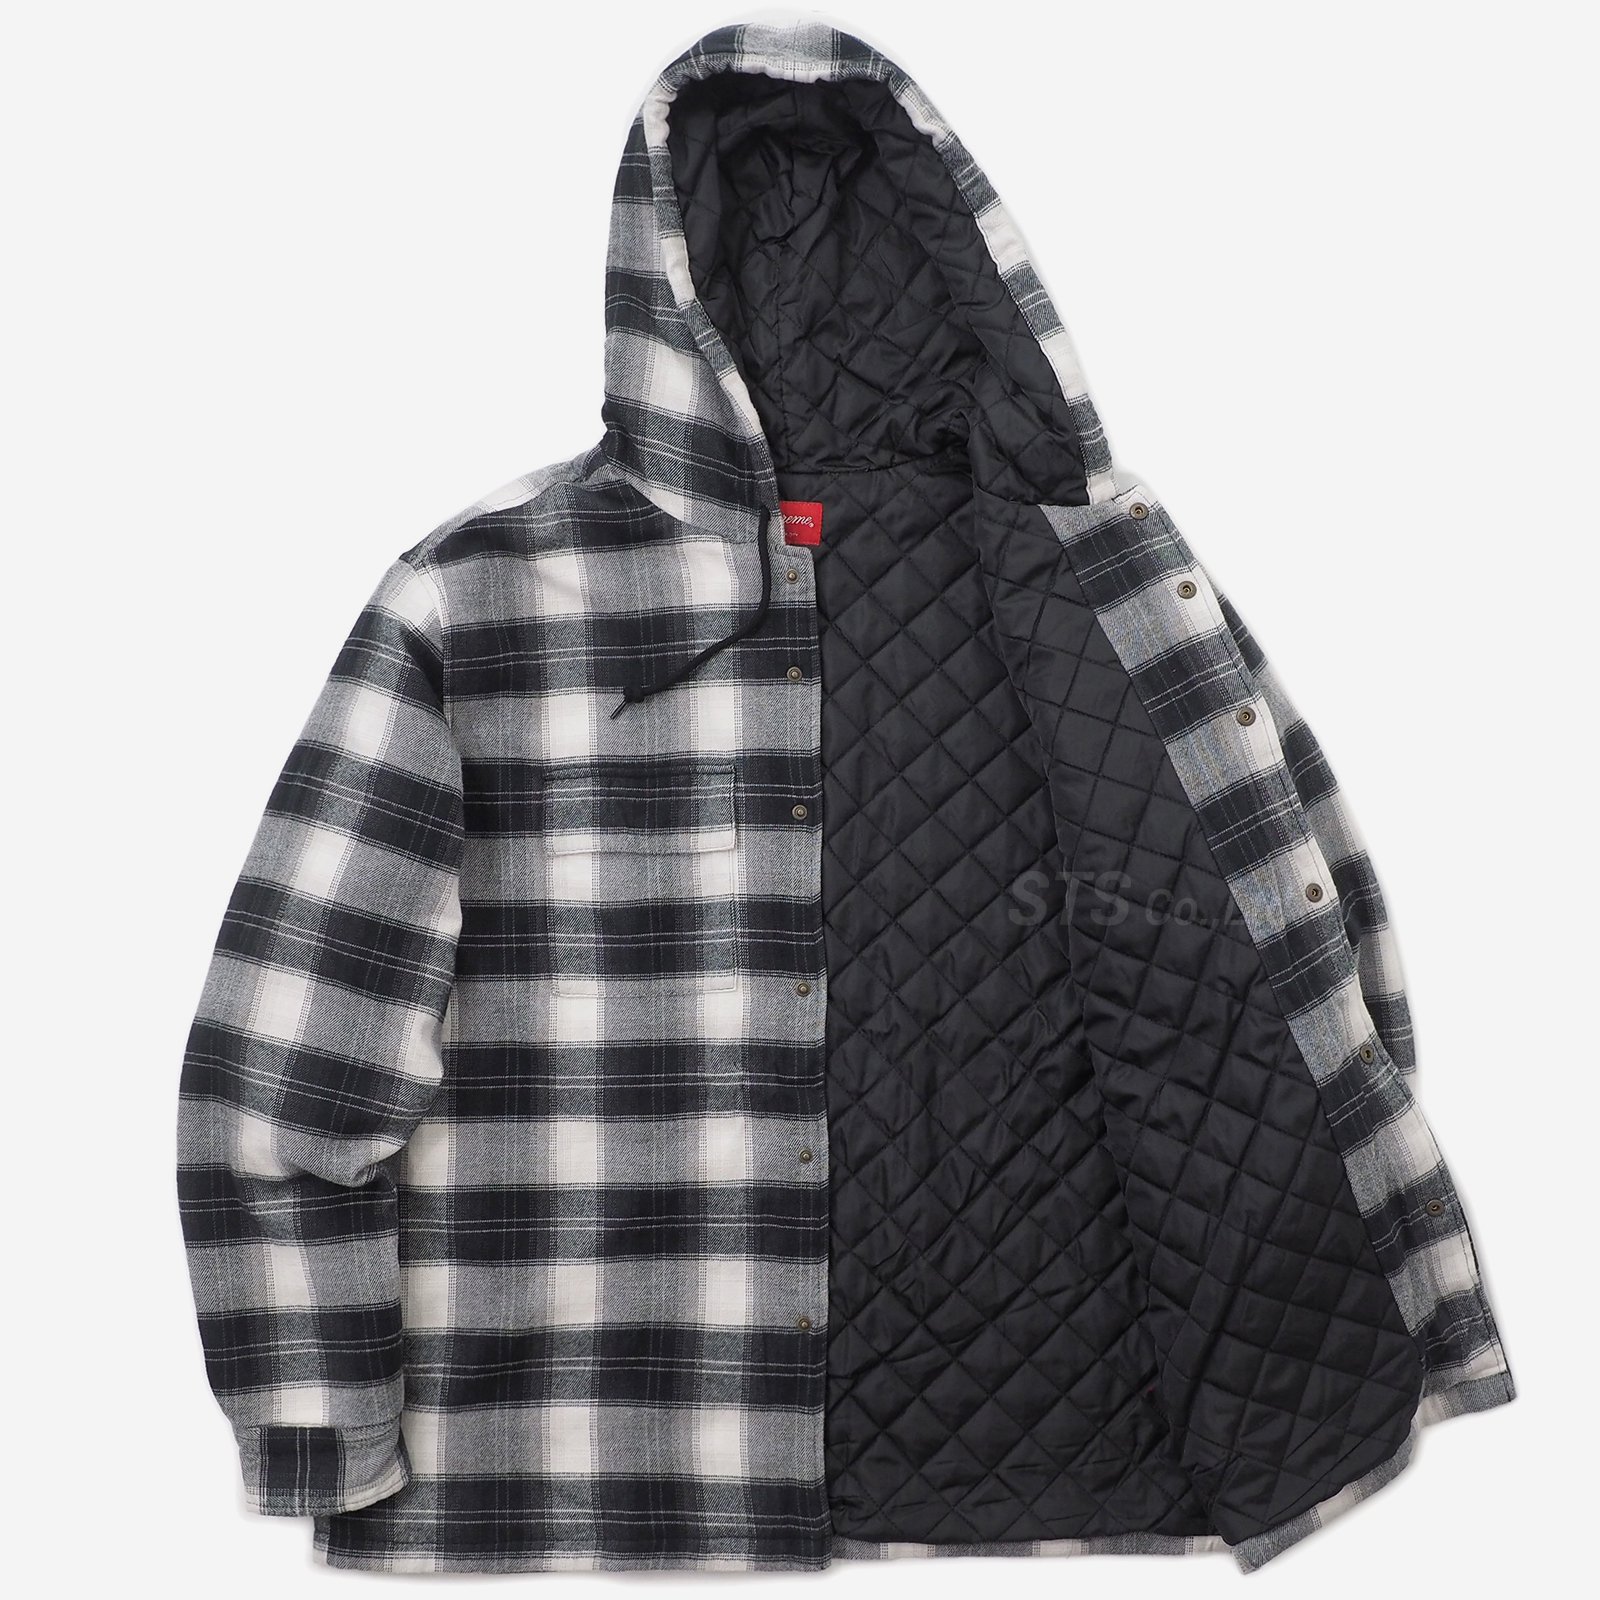 Supreme - Quilted Hooded Plaid Shirt - ParkSIDER